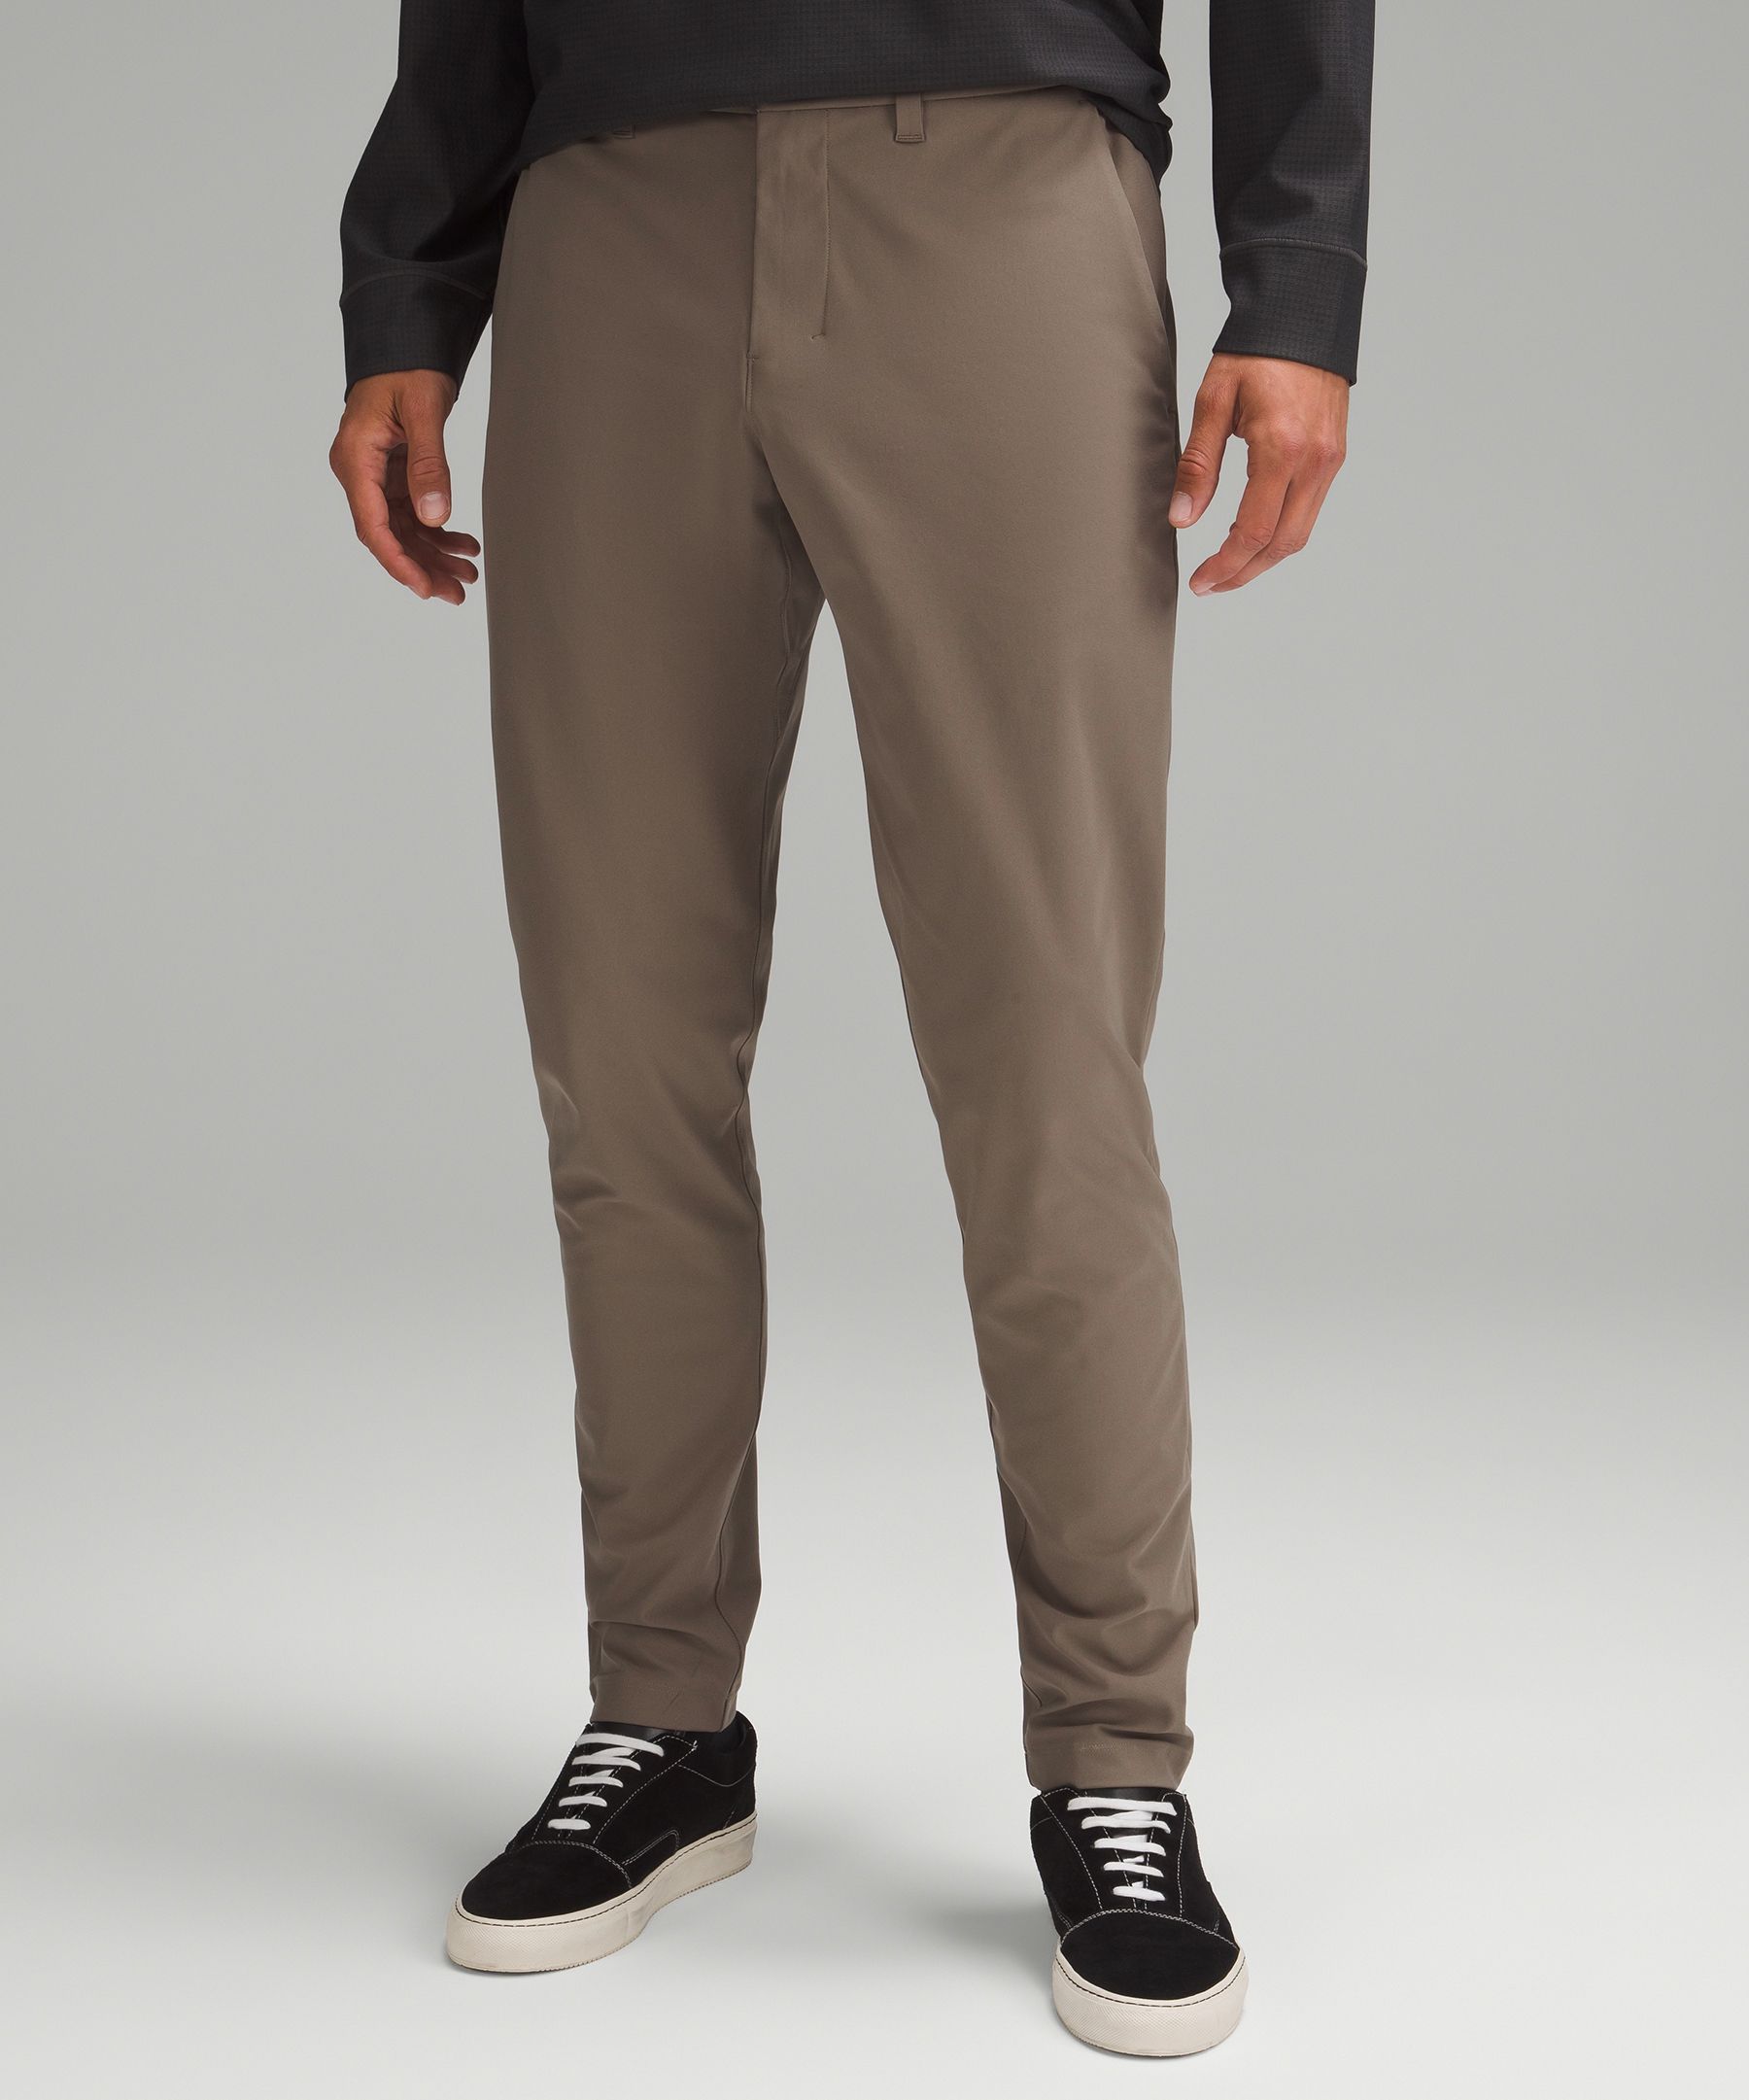 Lululemon Abc Pant Review  International Society of Precision Agriculture